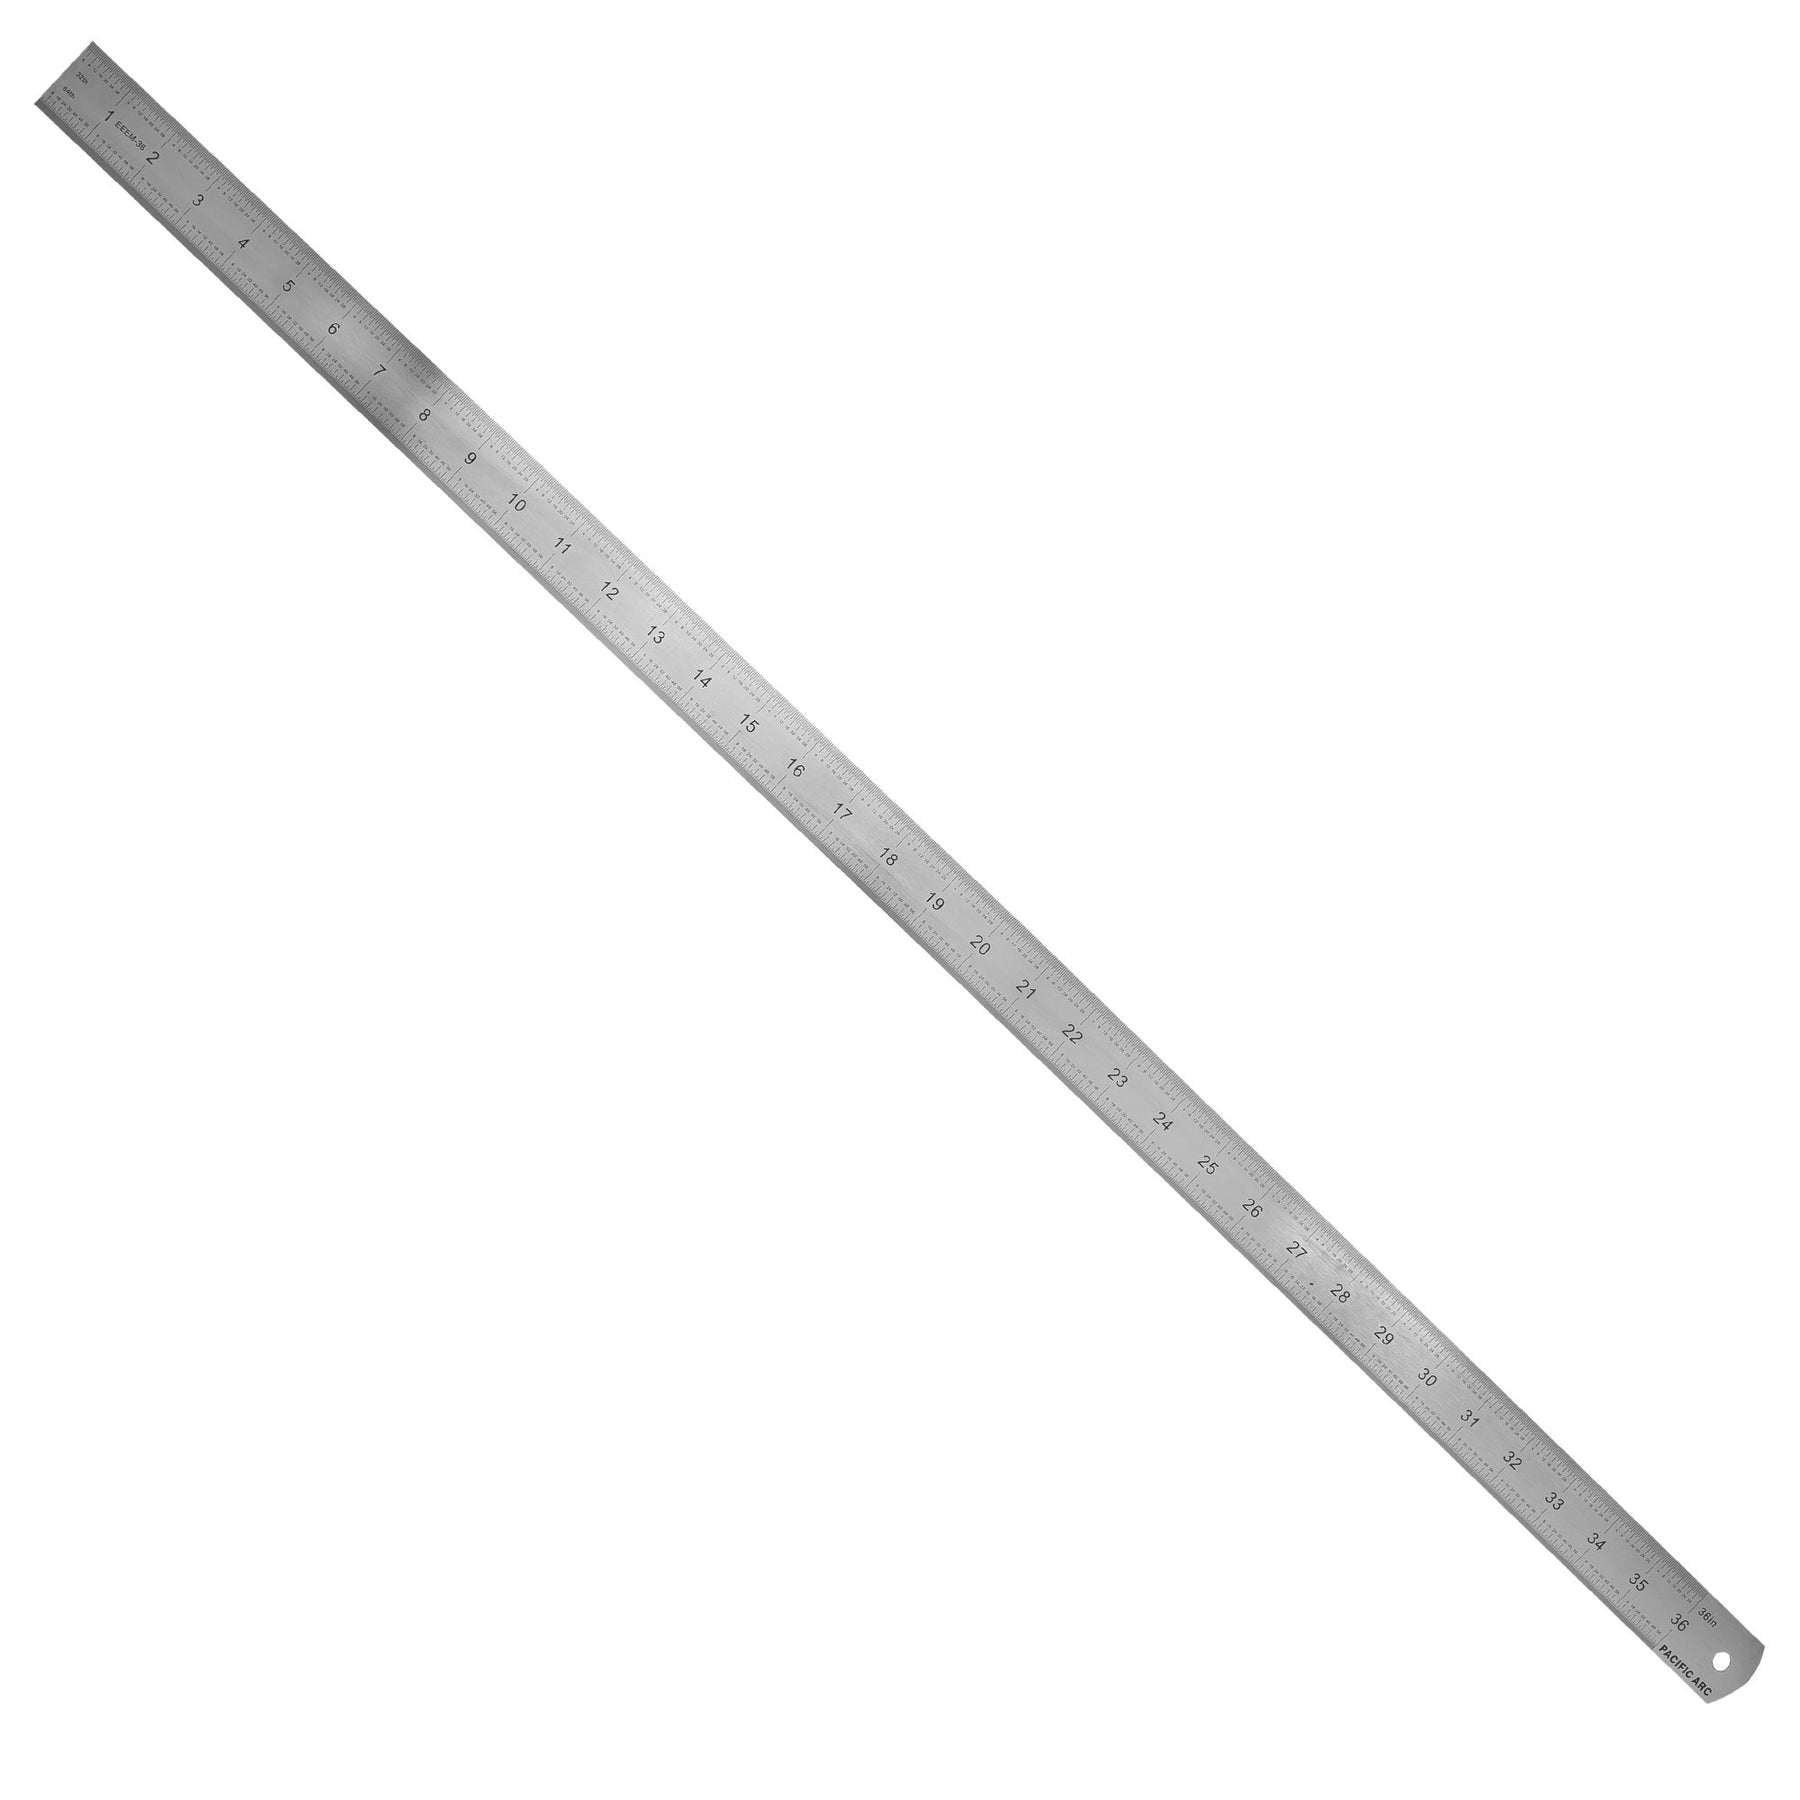 Pacific Arc Stainless Steel Ruler with Inch and Metric(mm), Non